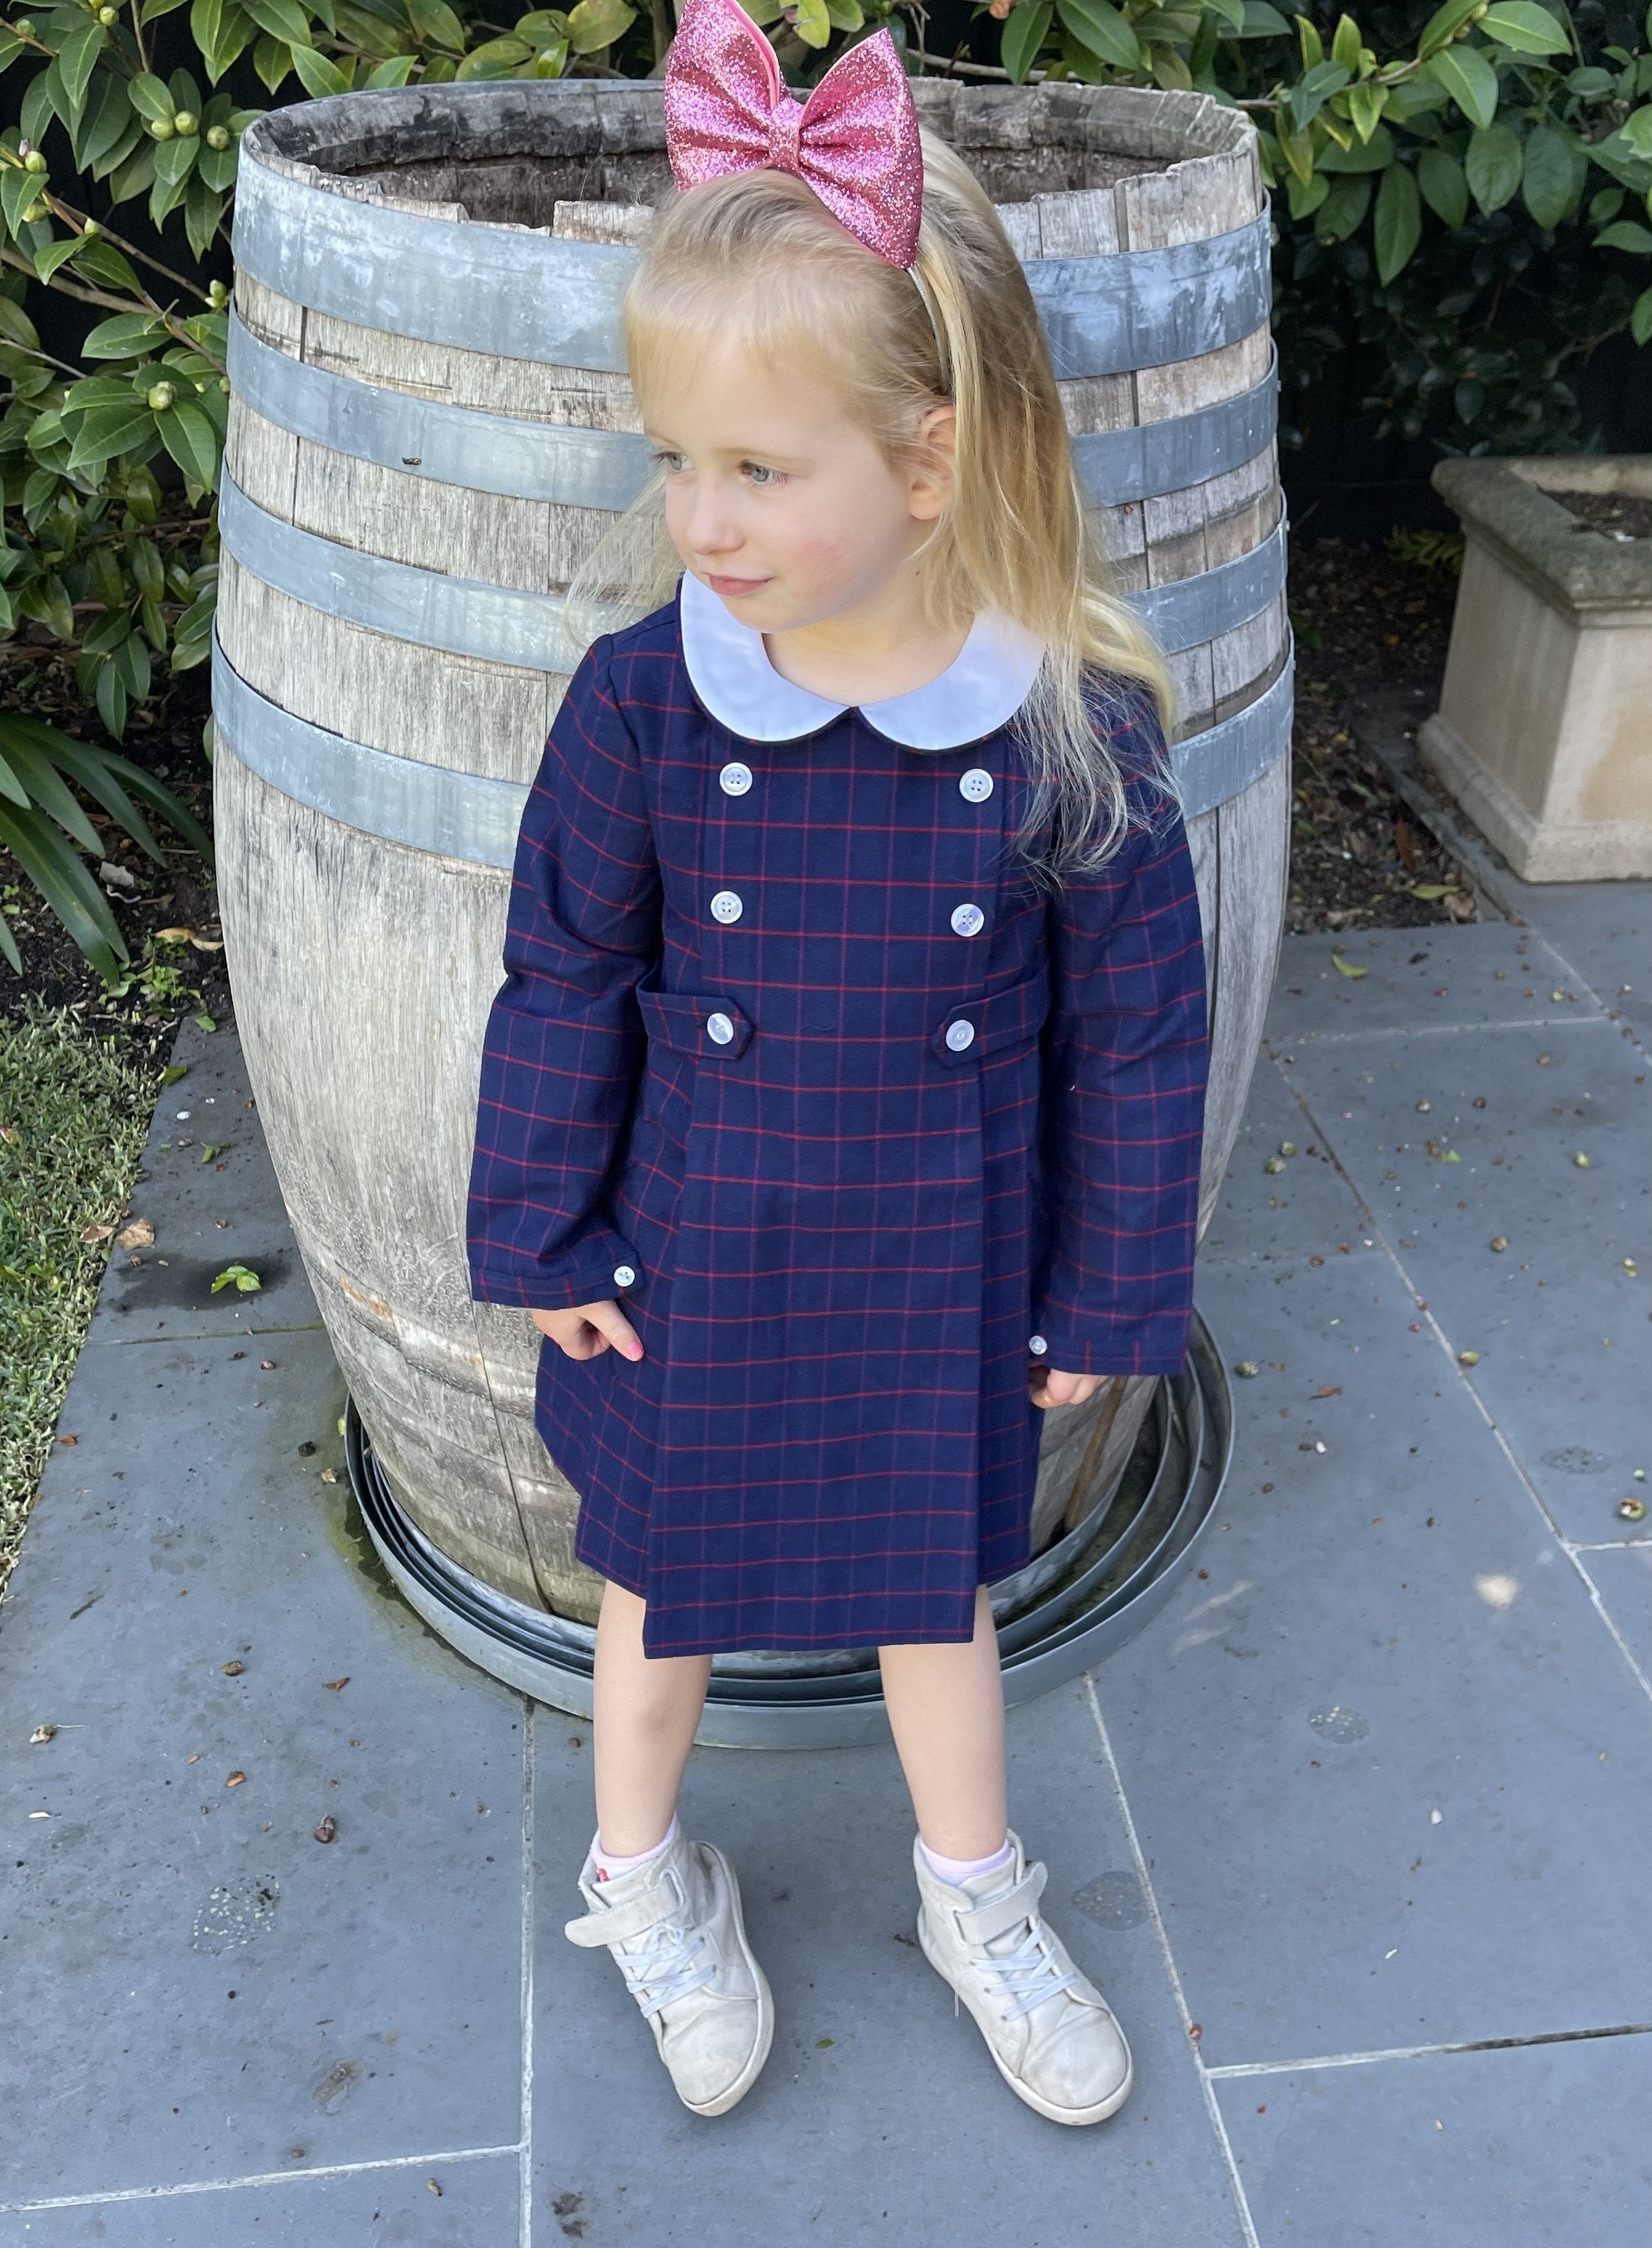 Grace Navy And Red Check Collared Dress - Cou Cou Baby